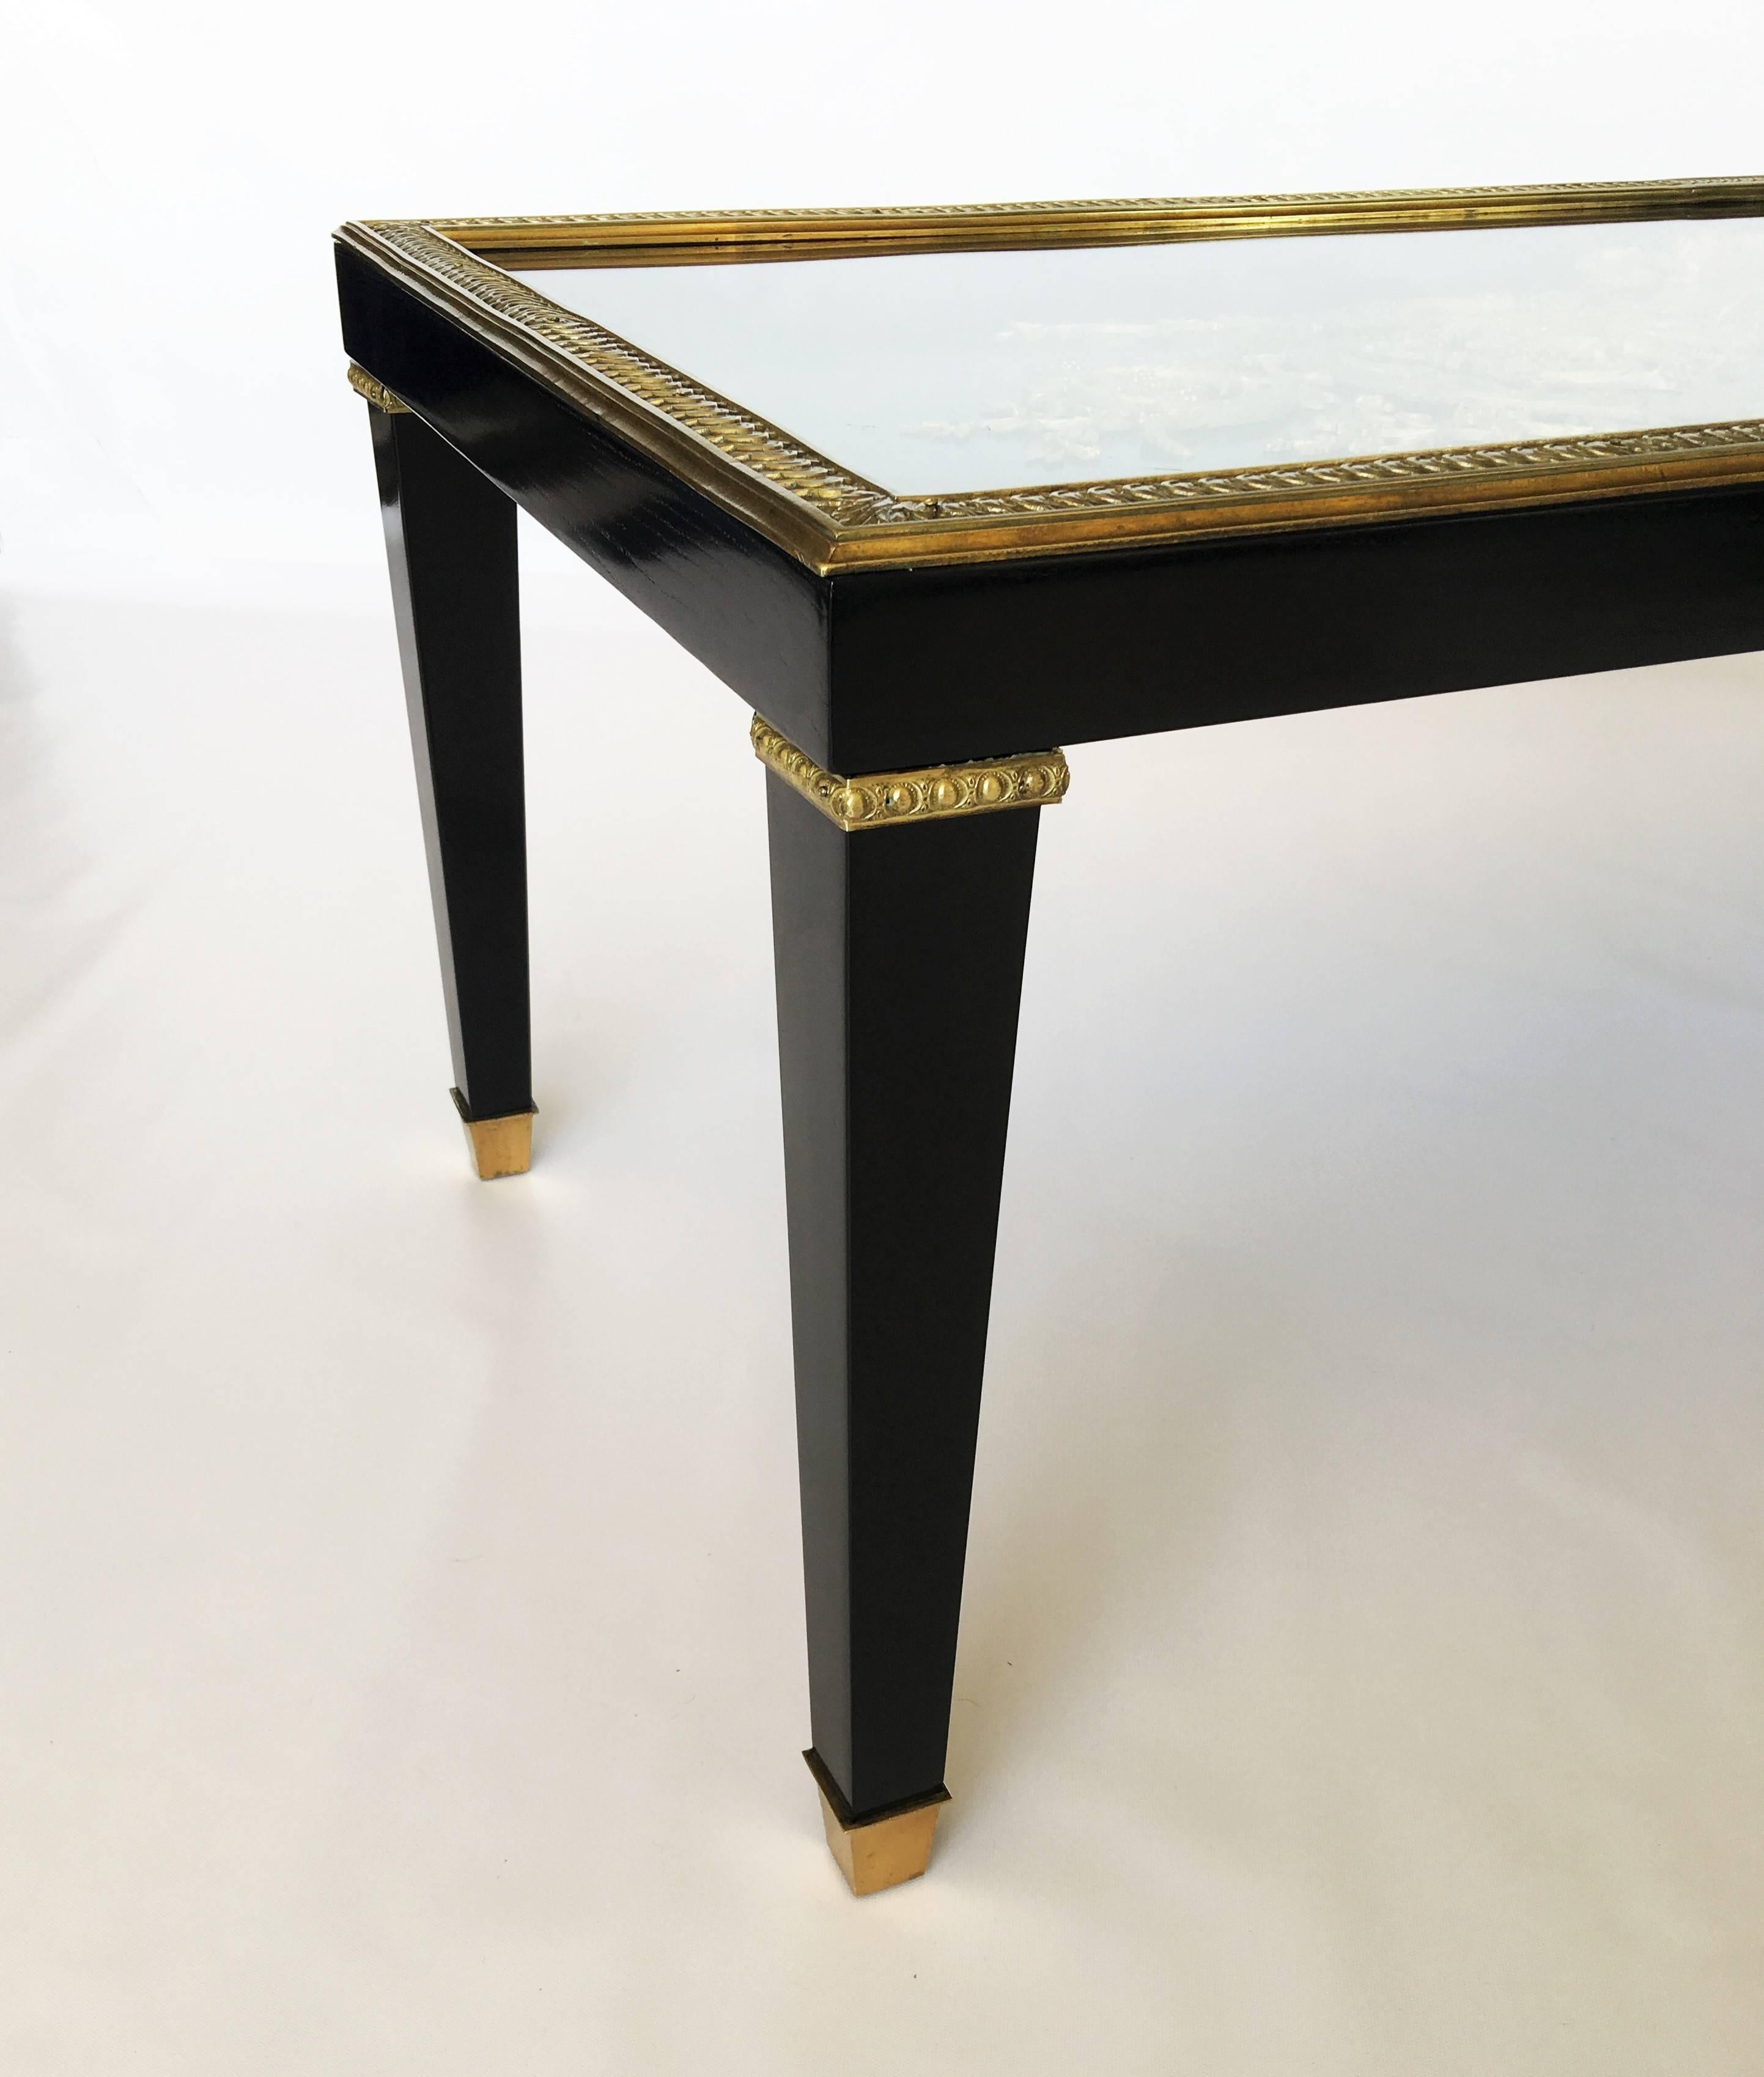 Regency Ebonized, Glass and Gilt Mounted Centre Table Attributed to Beurdeley For Sale 3